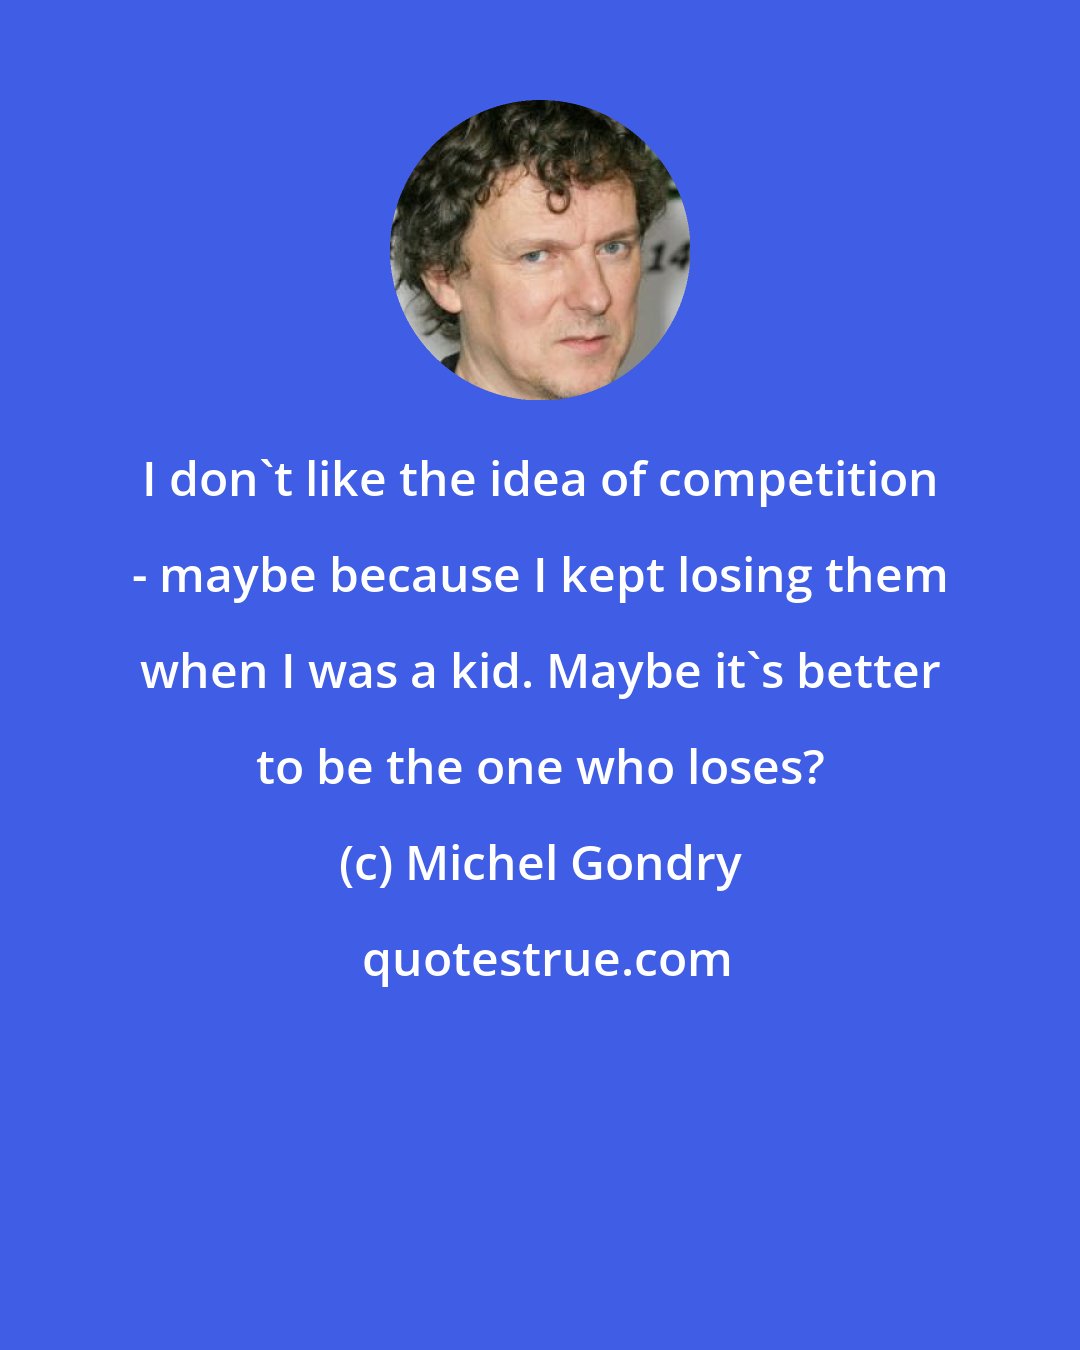 Michel Gondry: I don't like the idea of competition - maybe because I kept losing them when I was a kid. Maybe it's better to be the one who loses?